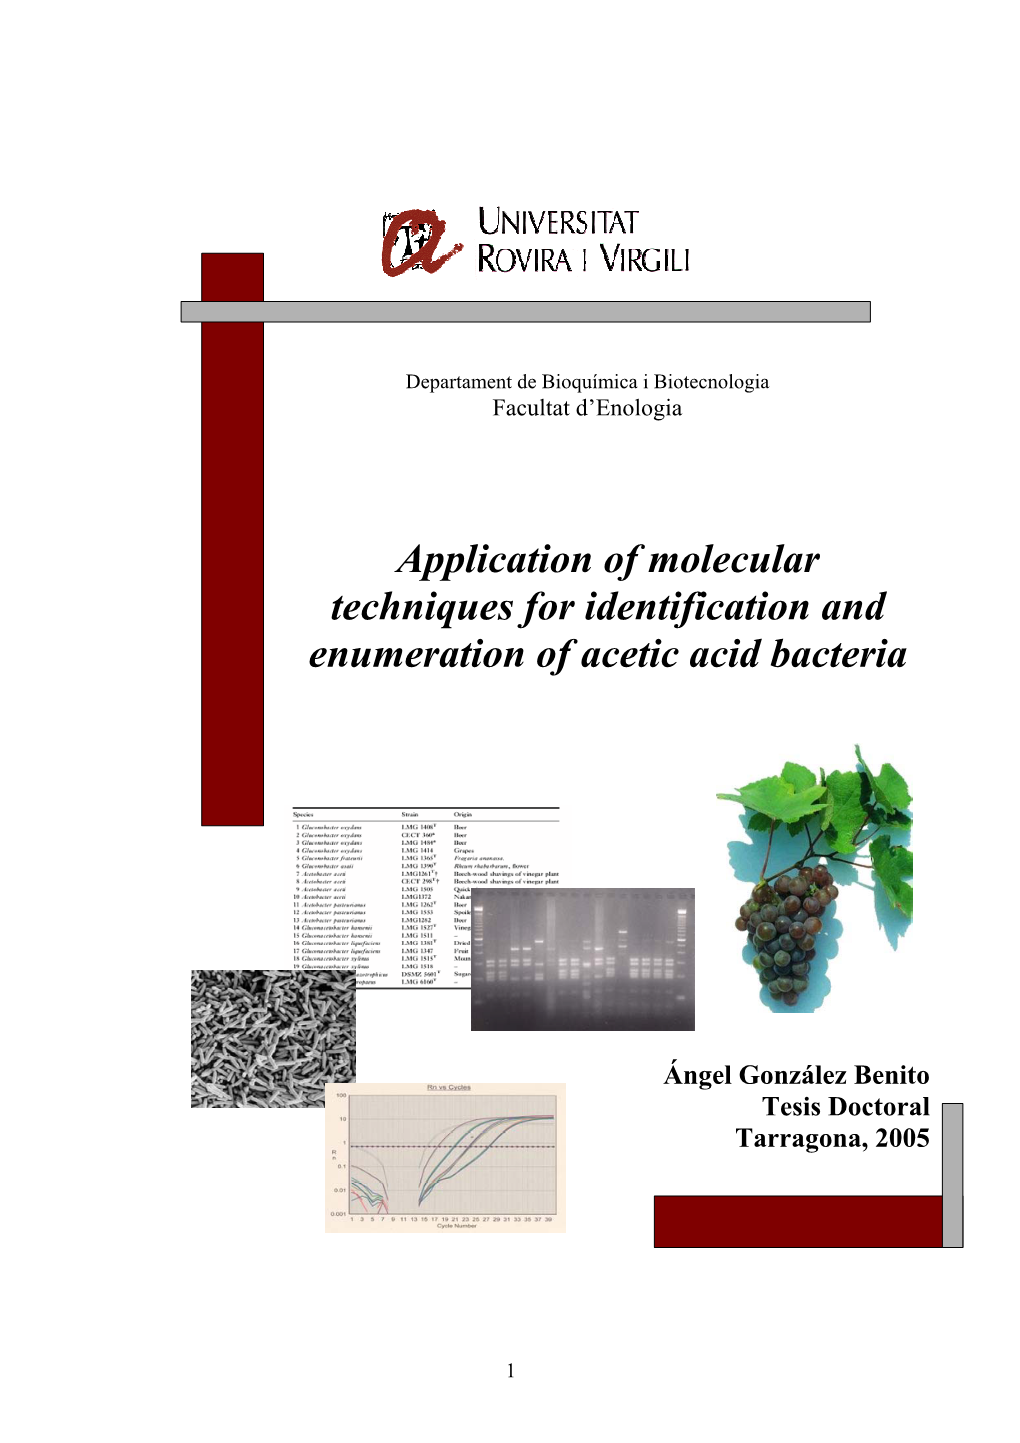 Application of Molecular Techniques for Identification and Enumeration of Acetic Acid Bacteria